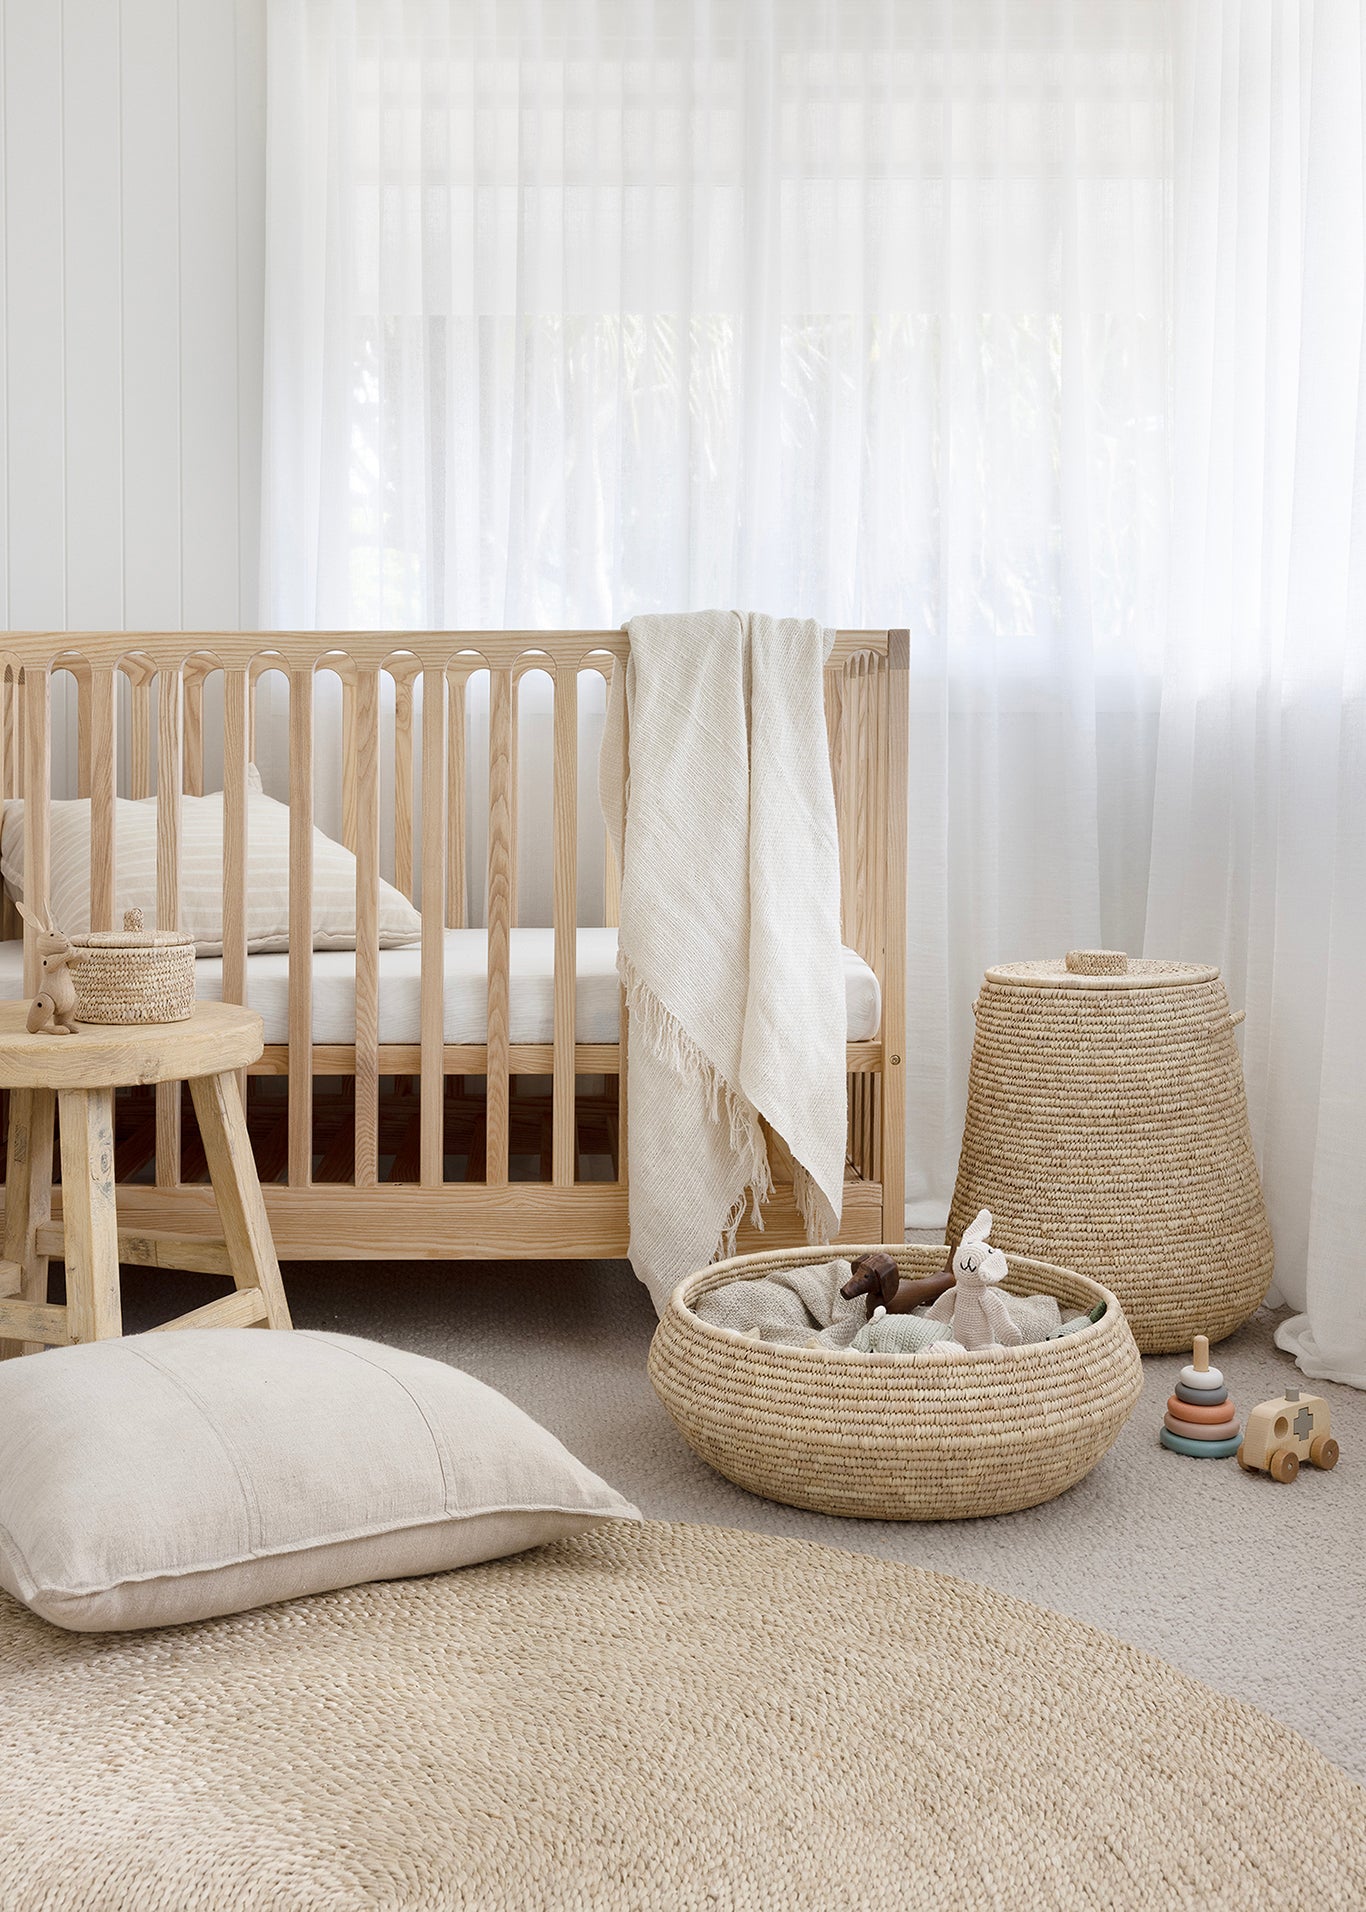 Style | Using Natural Fibres To Style Children's Rooms